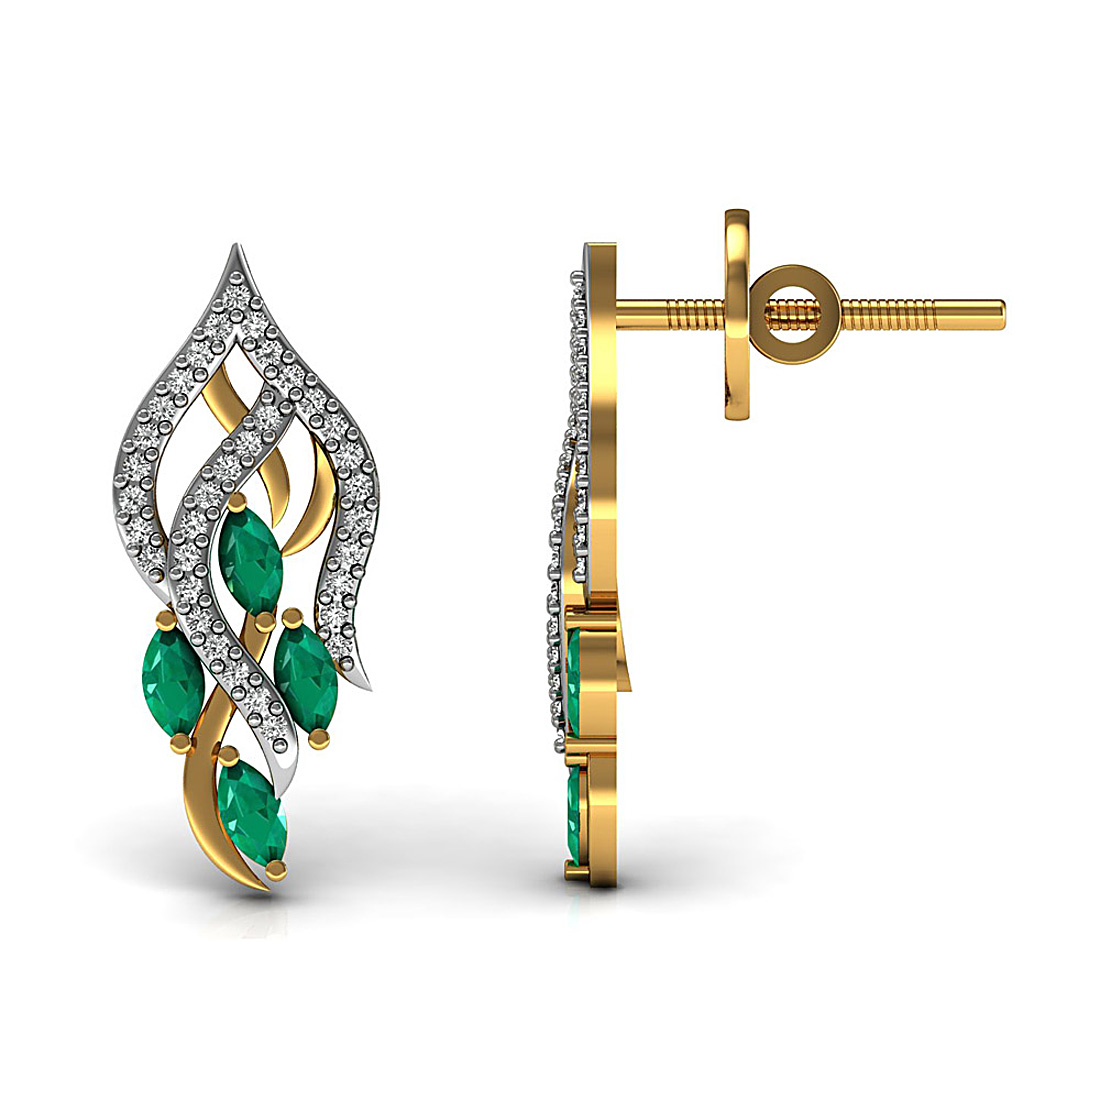 18K Solid yellow gold flower stud earrings studded with natural emerald and genuine diamond.